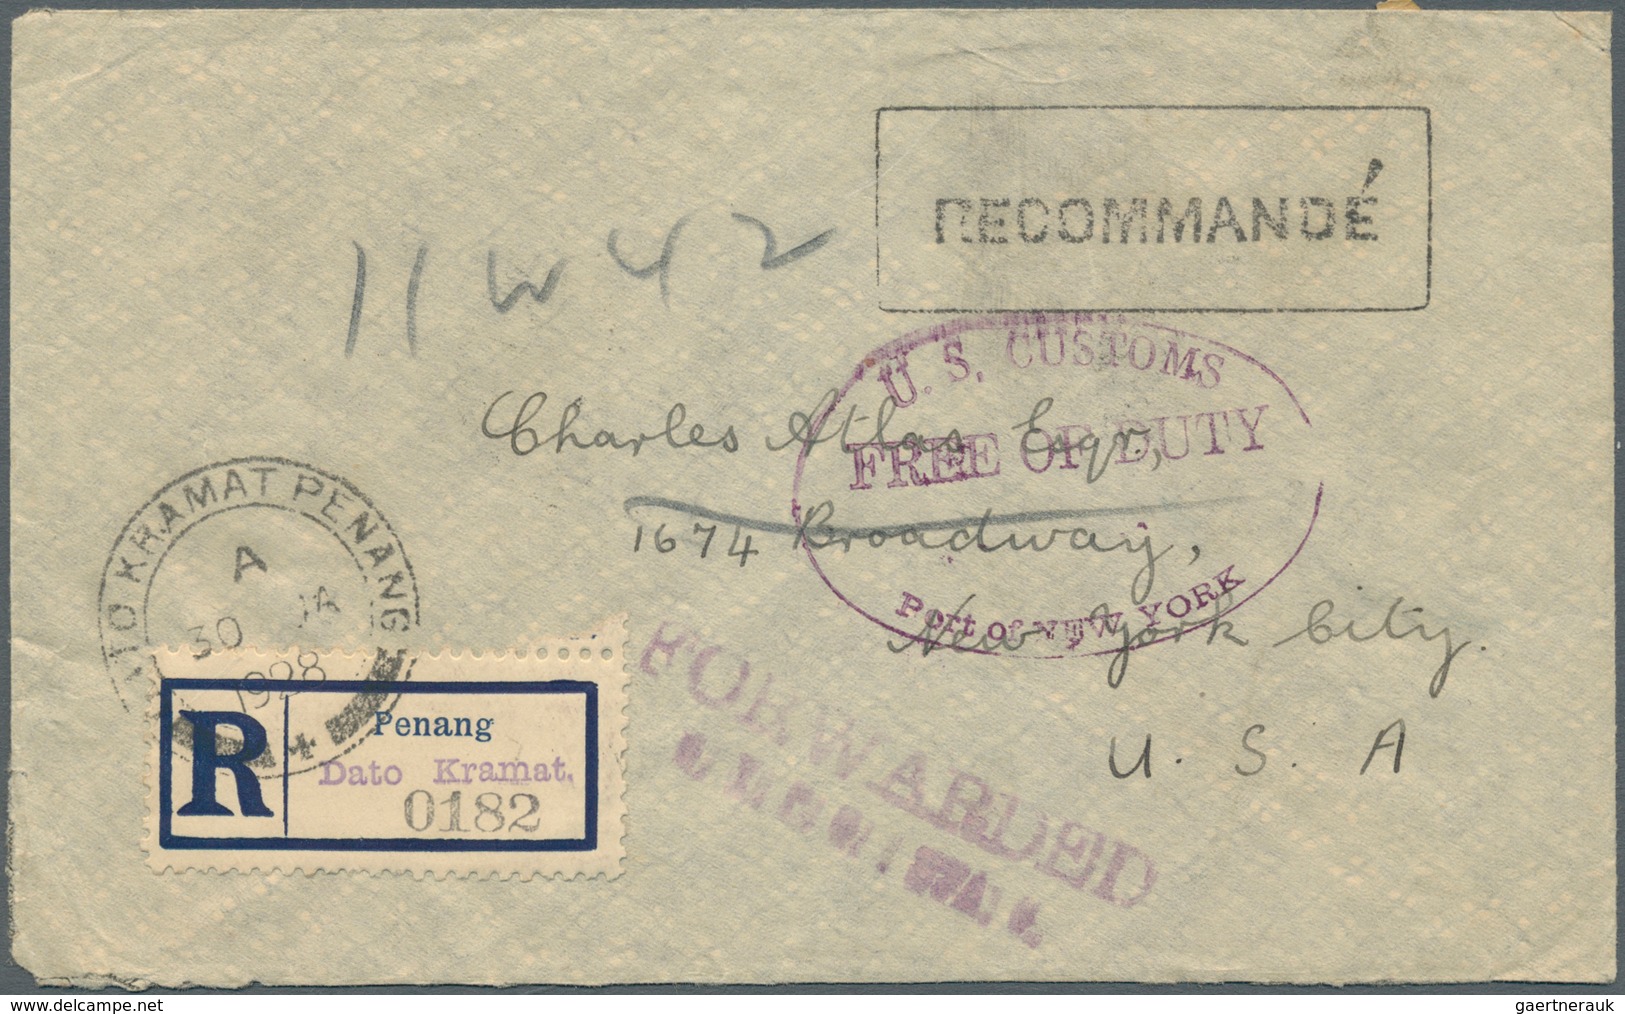 Malaiische Staaten - Penang: 1928 DATO KRAMAT: Registered Cover To New York City Franked On The Reve - Penang